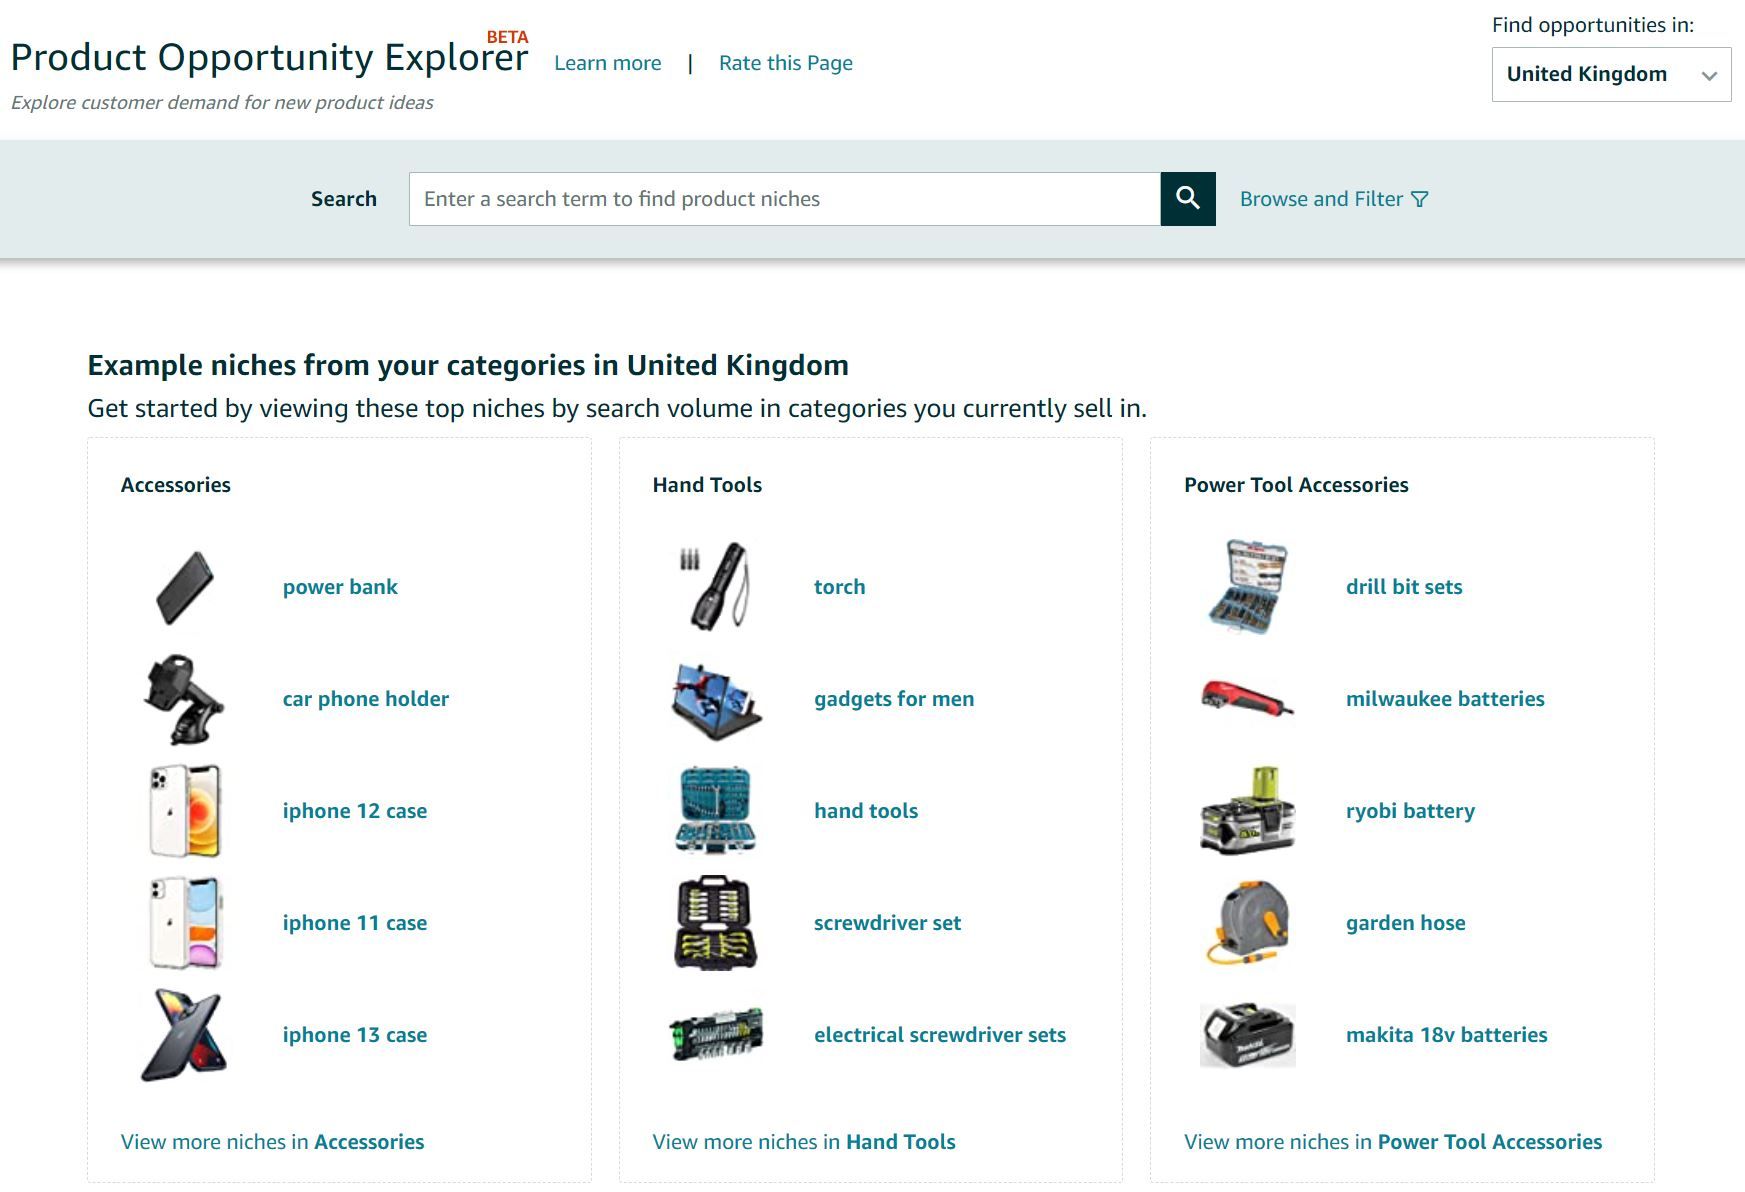 Example niches of the Product Opportunity Explorer